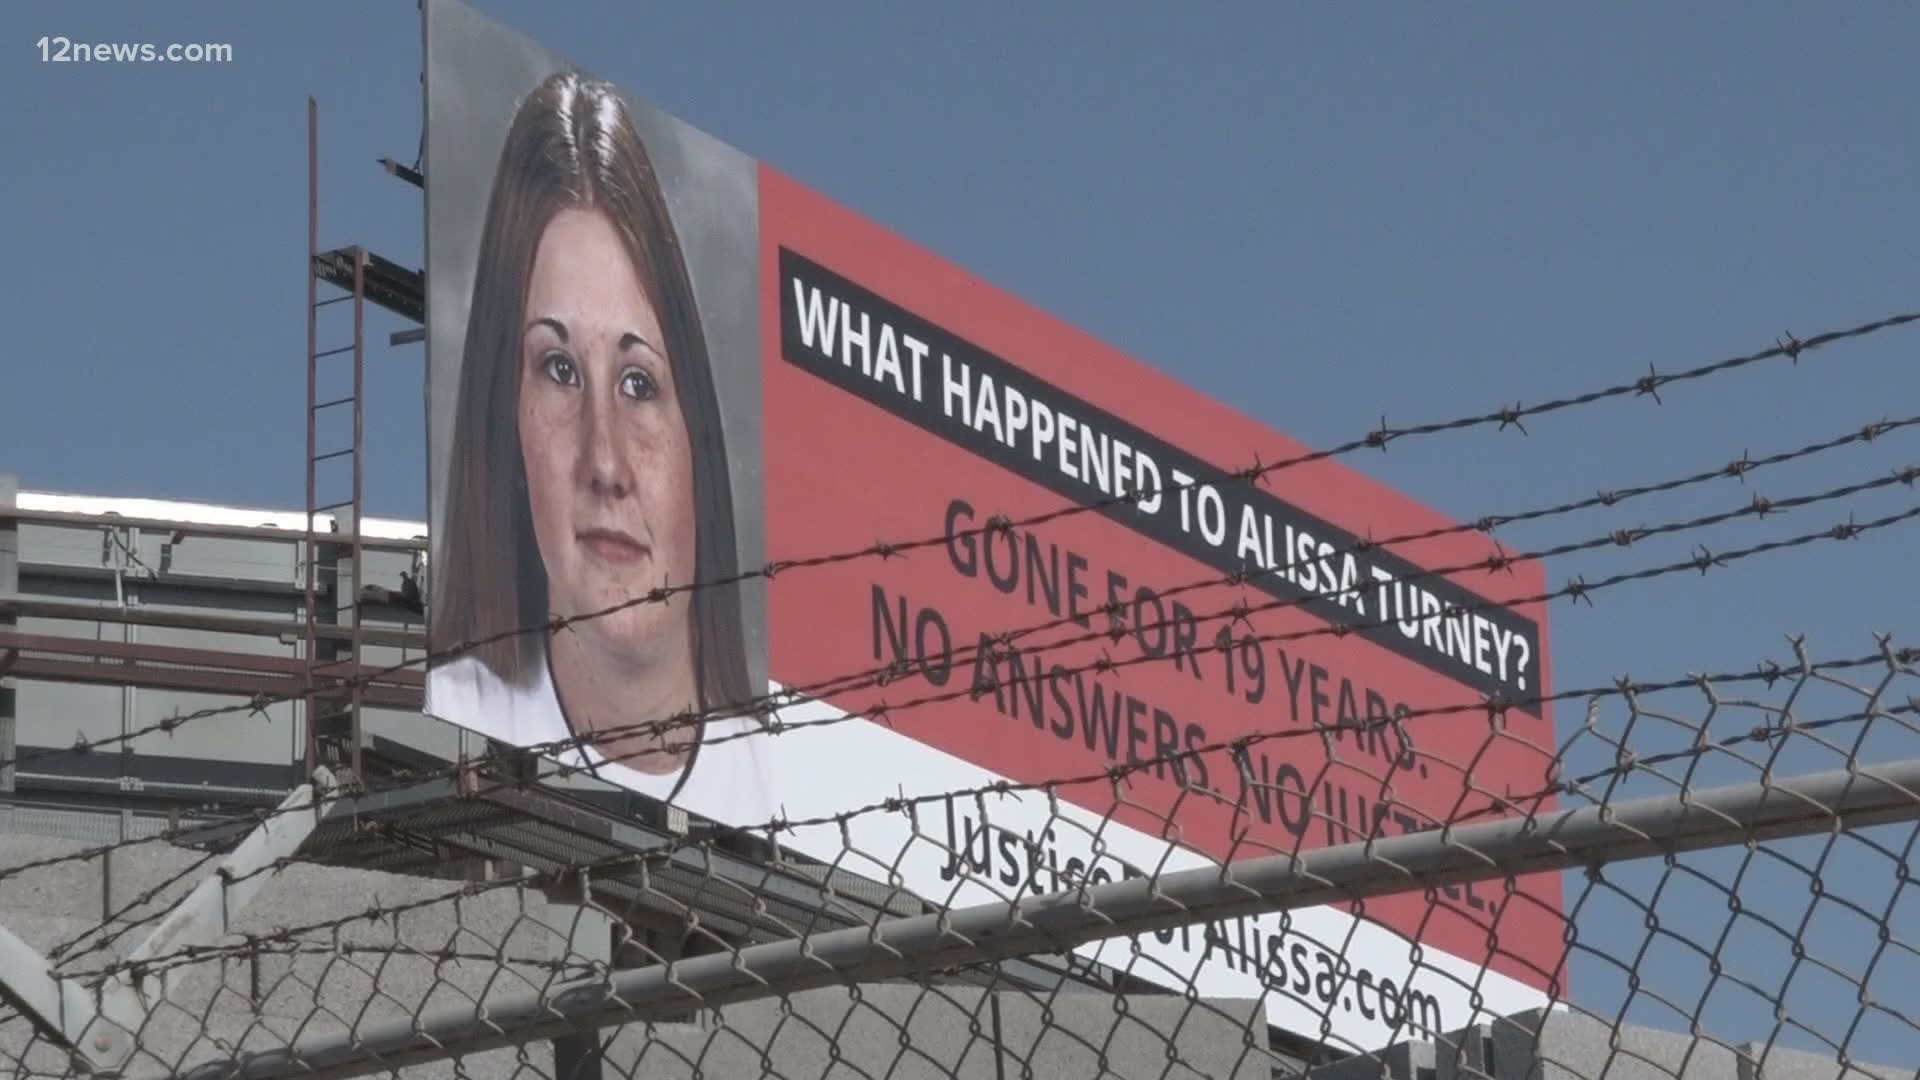 The billboard, north of I-17, east of 19th Avenue, says "What happened to Alissa Turney? Gone for 19 years. No answers. No justice. JusticeForAlissa.com."